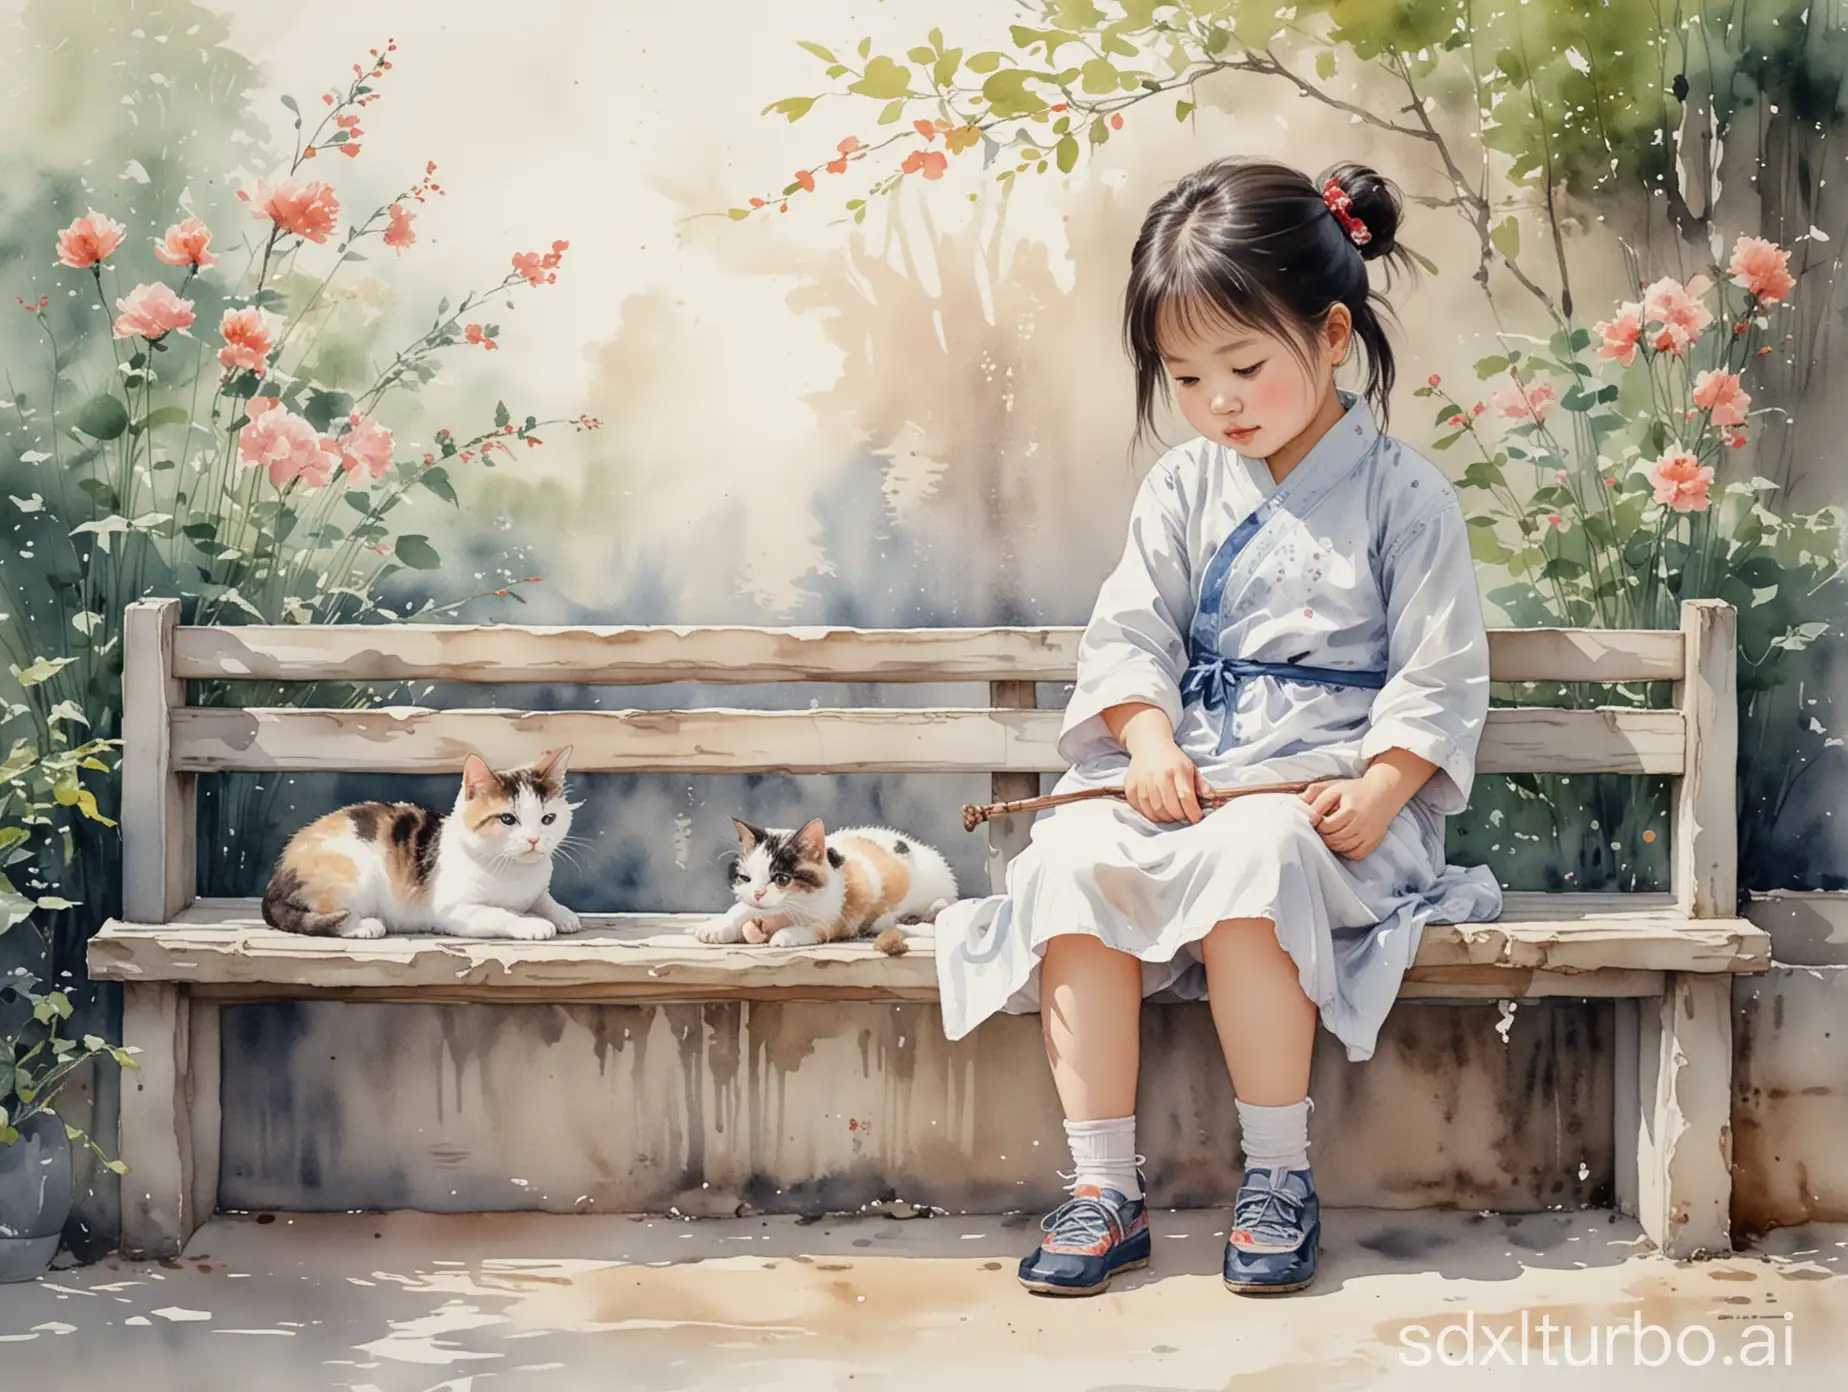 Chinese-Girl-with-Cat-Sitting-on-Bench-Watercolor-Painting